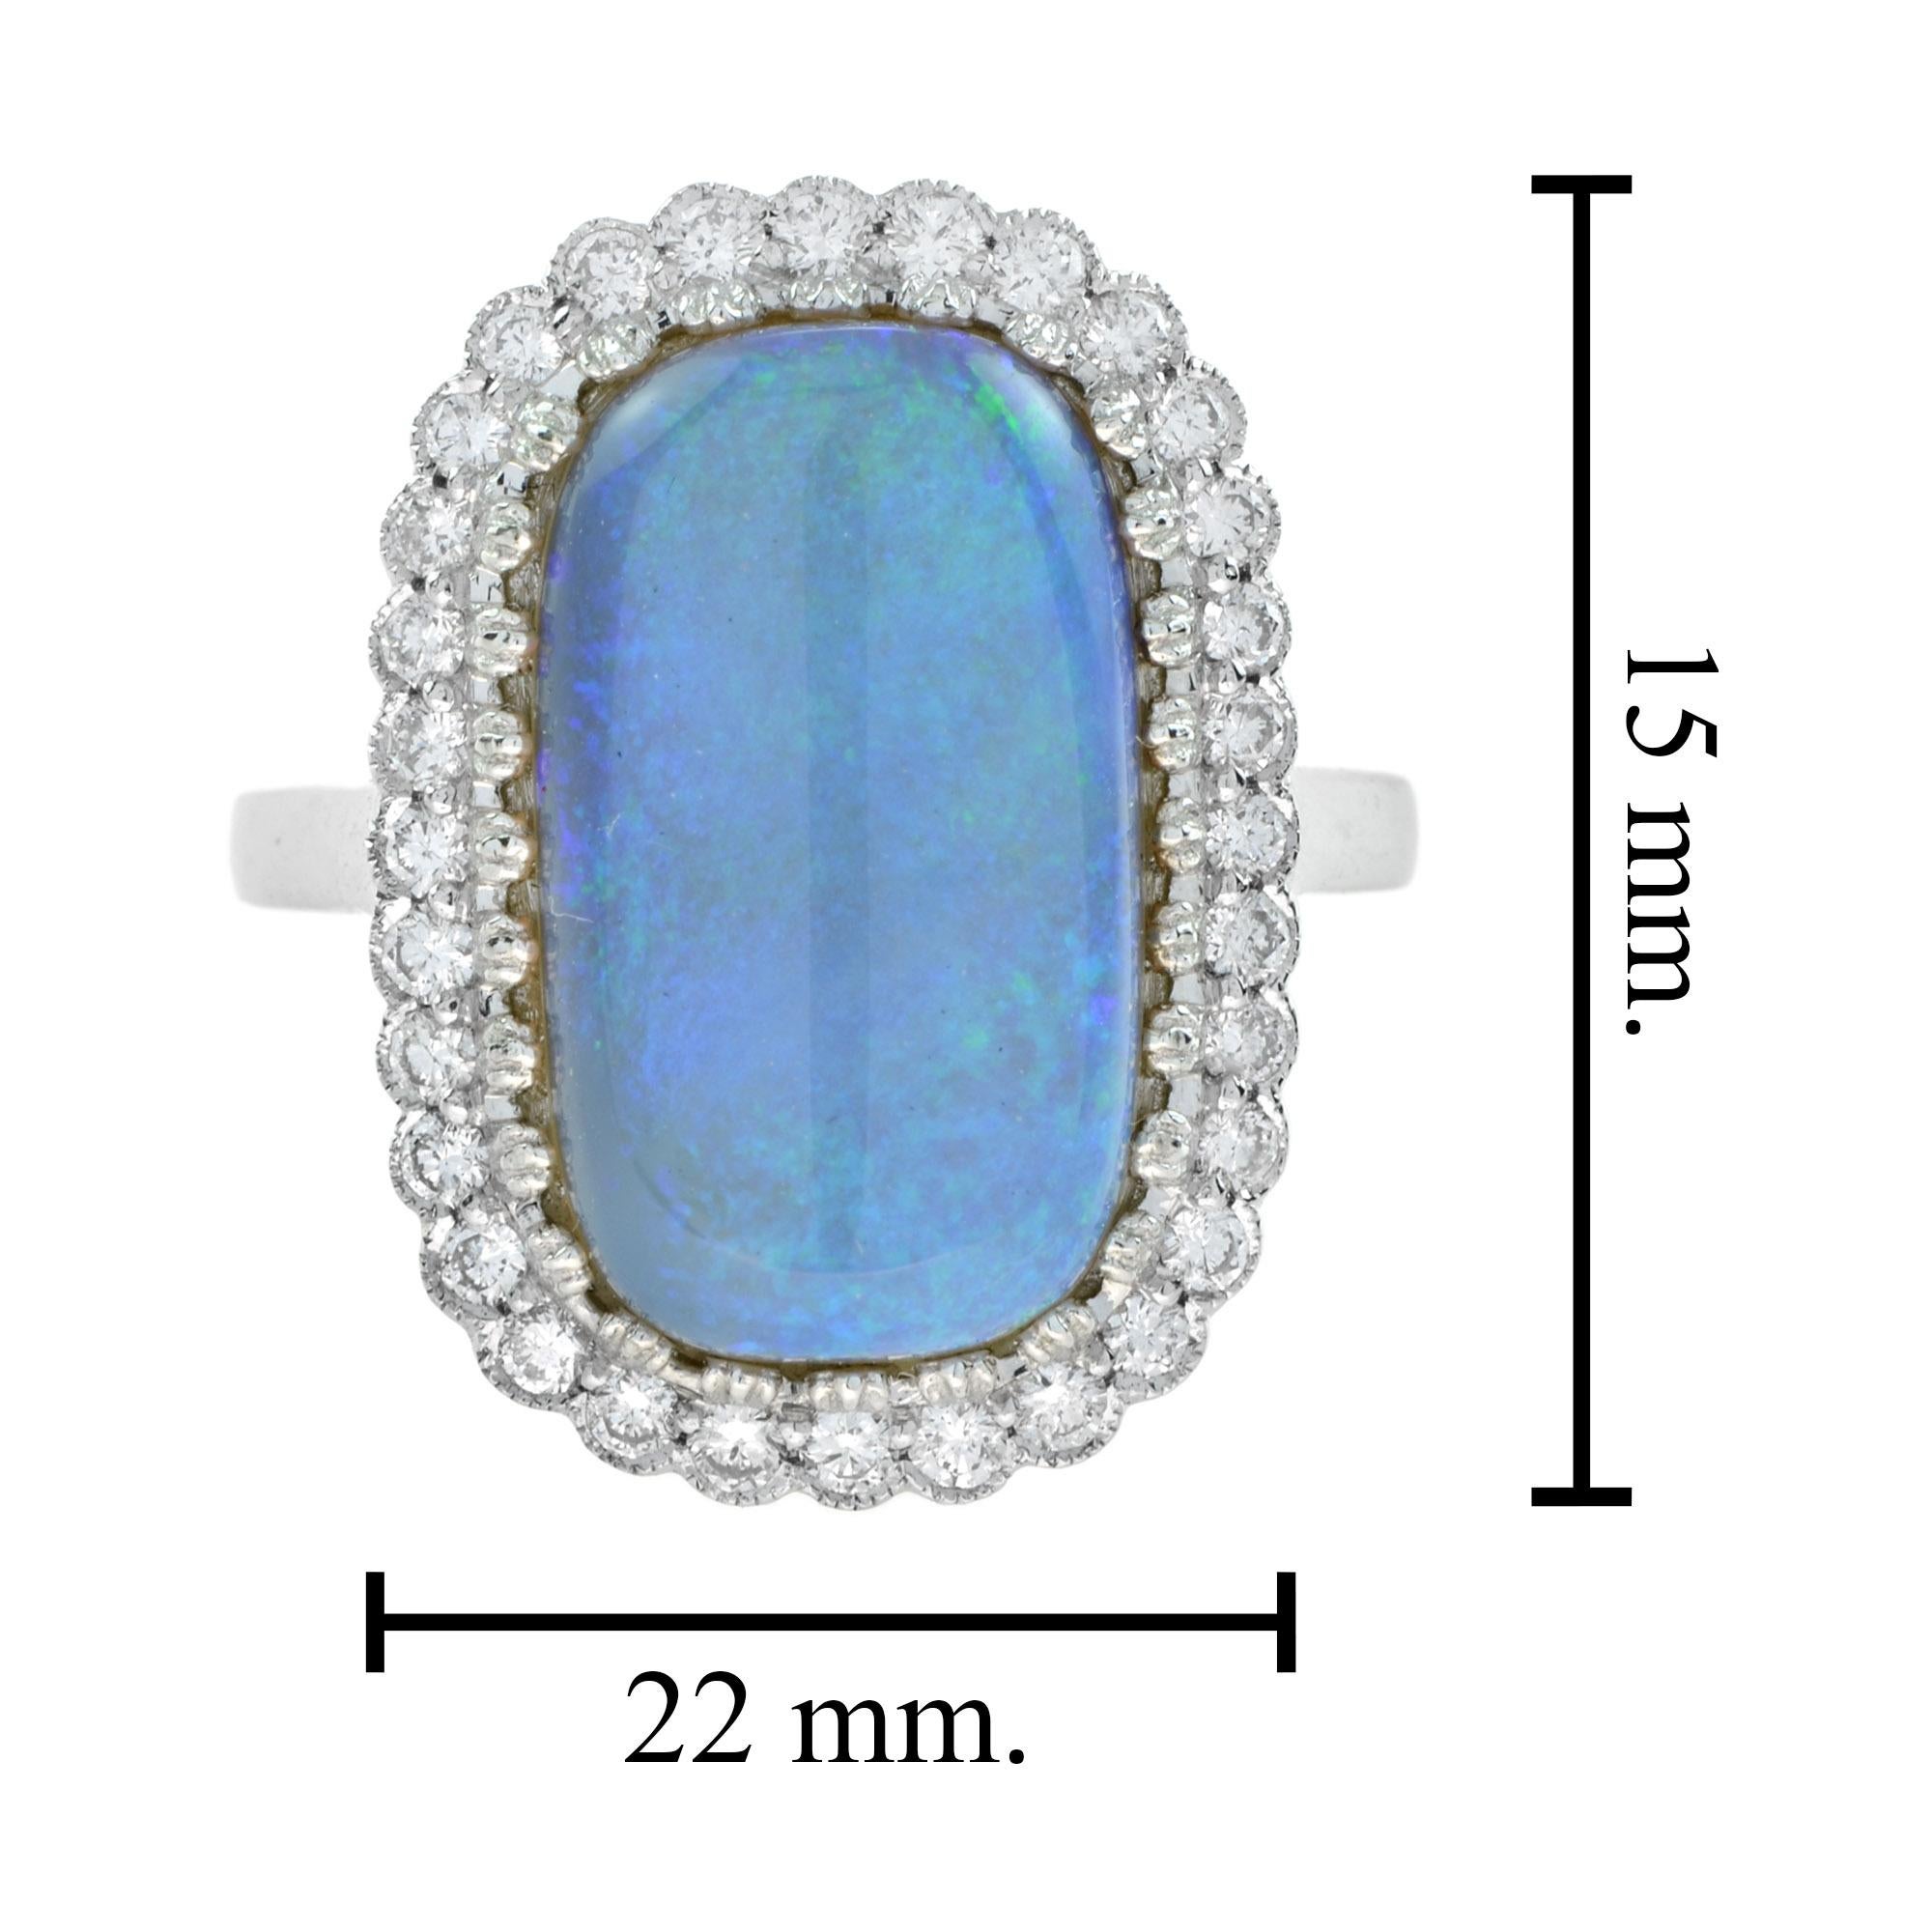 5.2 Ct. Crystal Australian Opal and Diamond Halo Ring in 18K White Gold For Sale 1